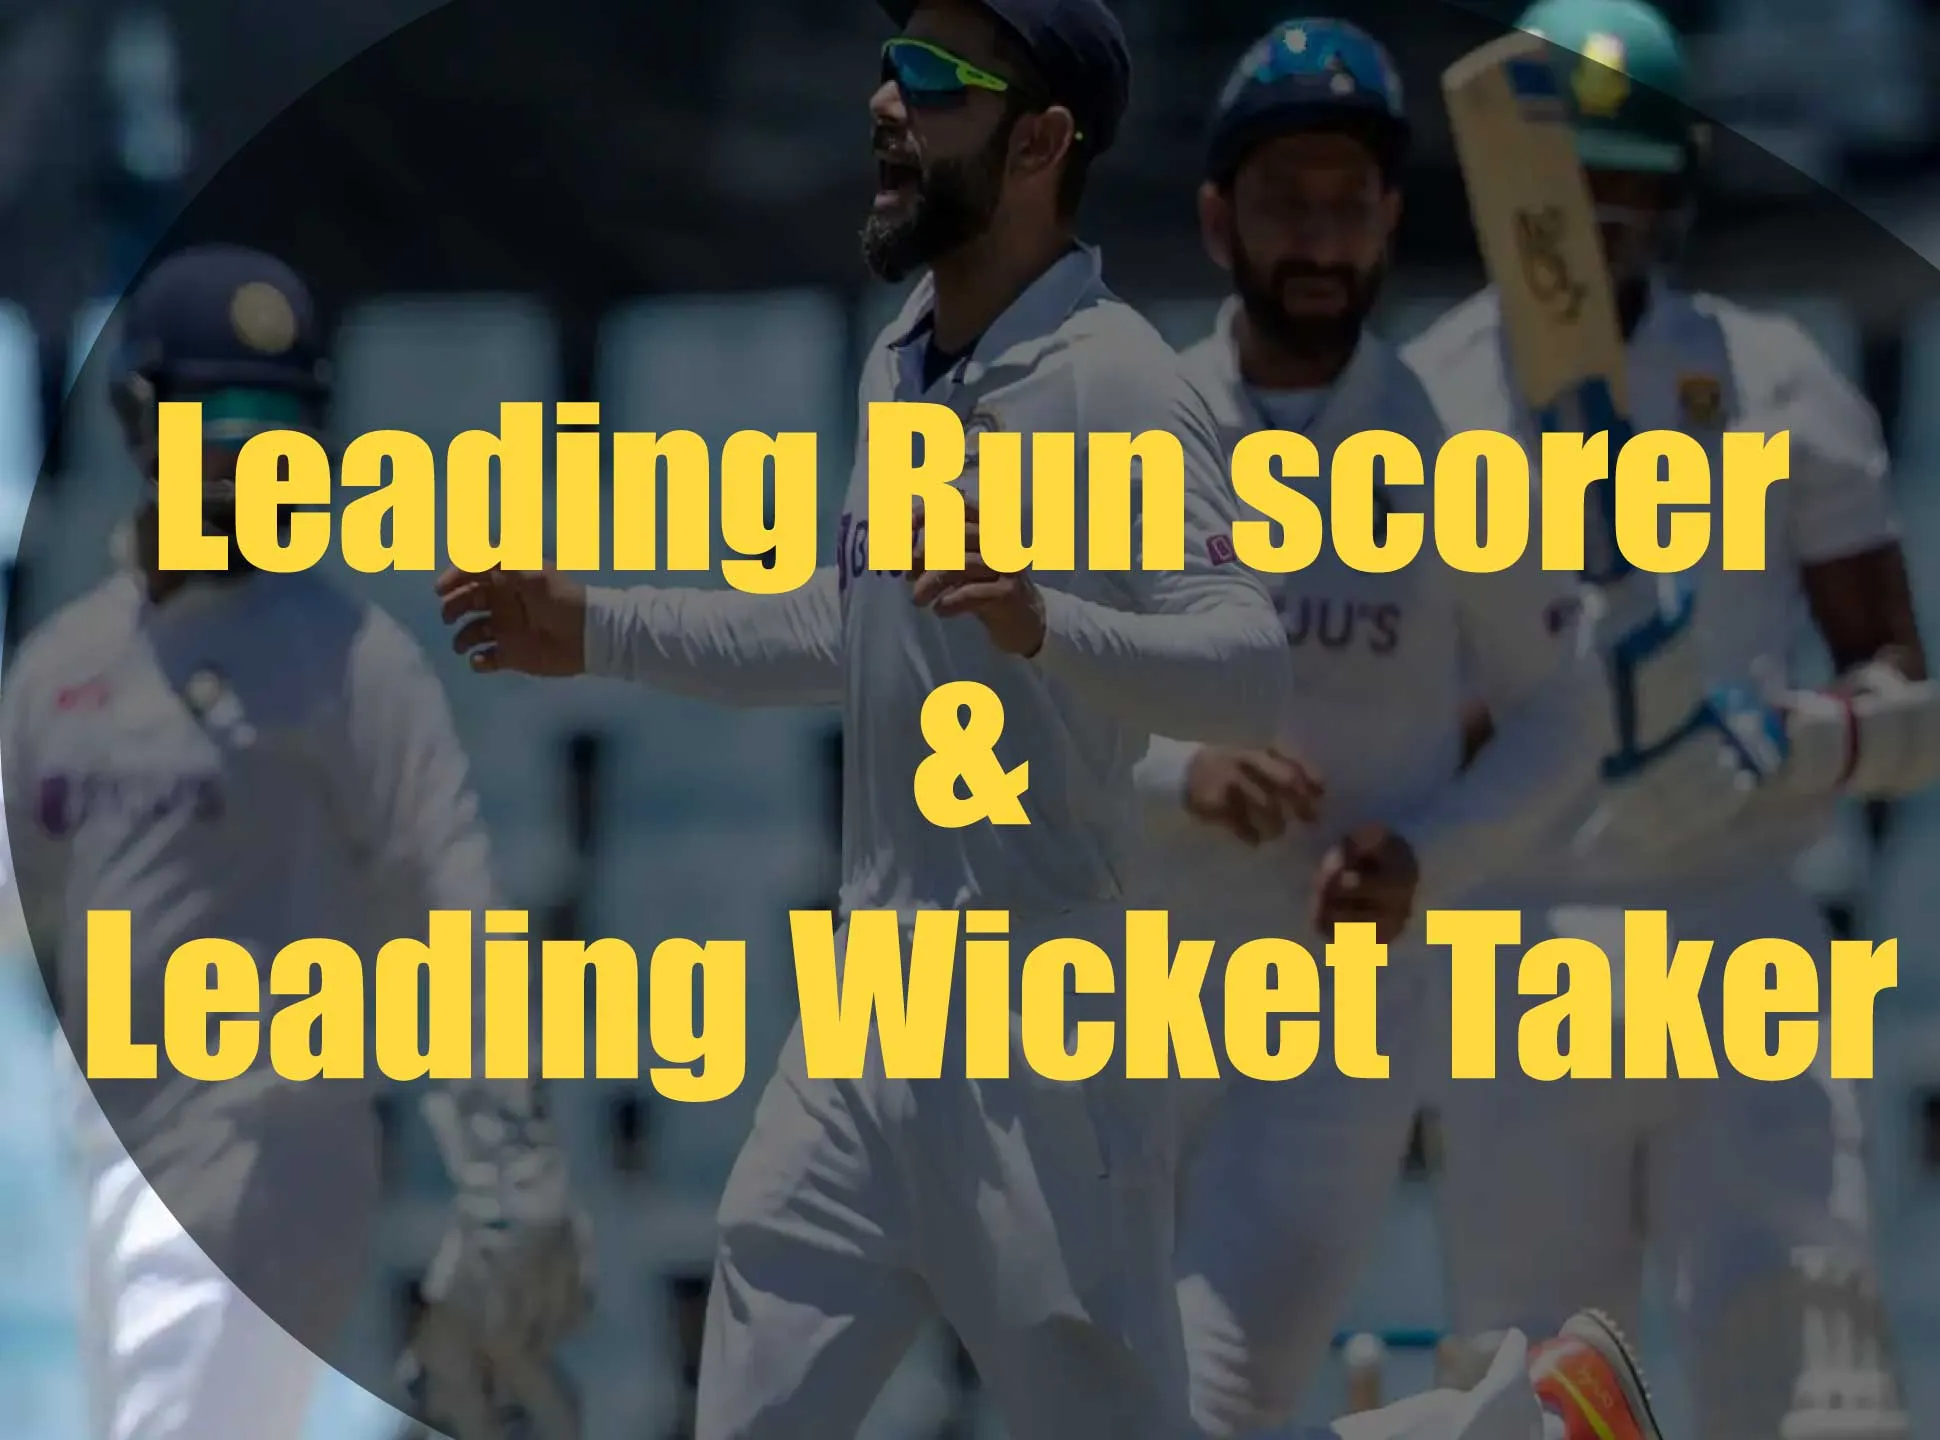 Another bet that you can place during the cricket match is leading run scorer.